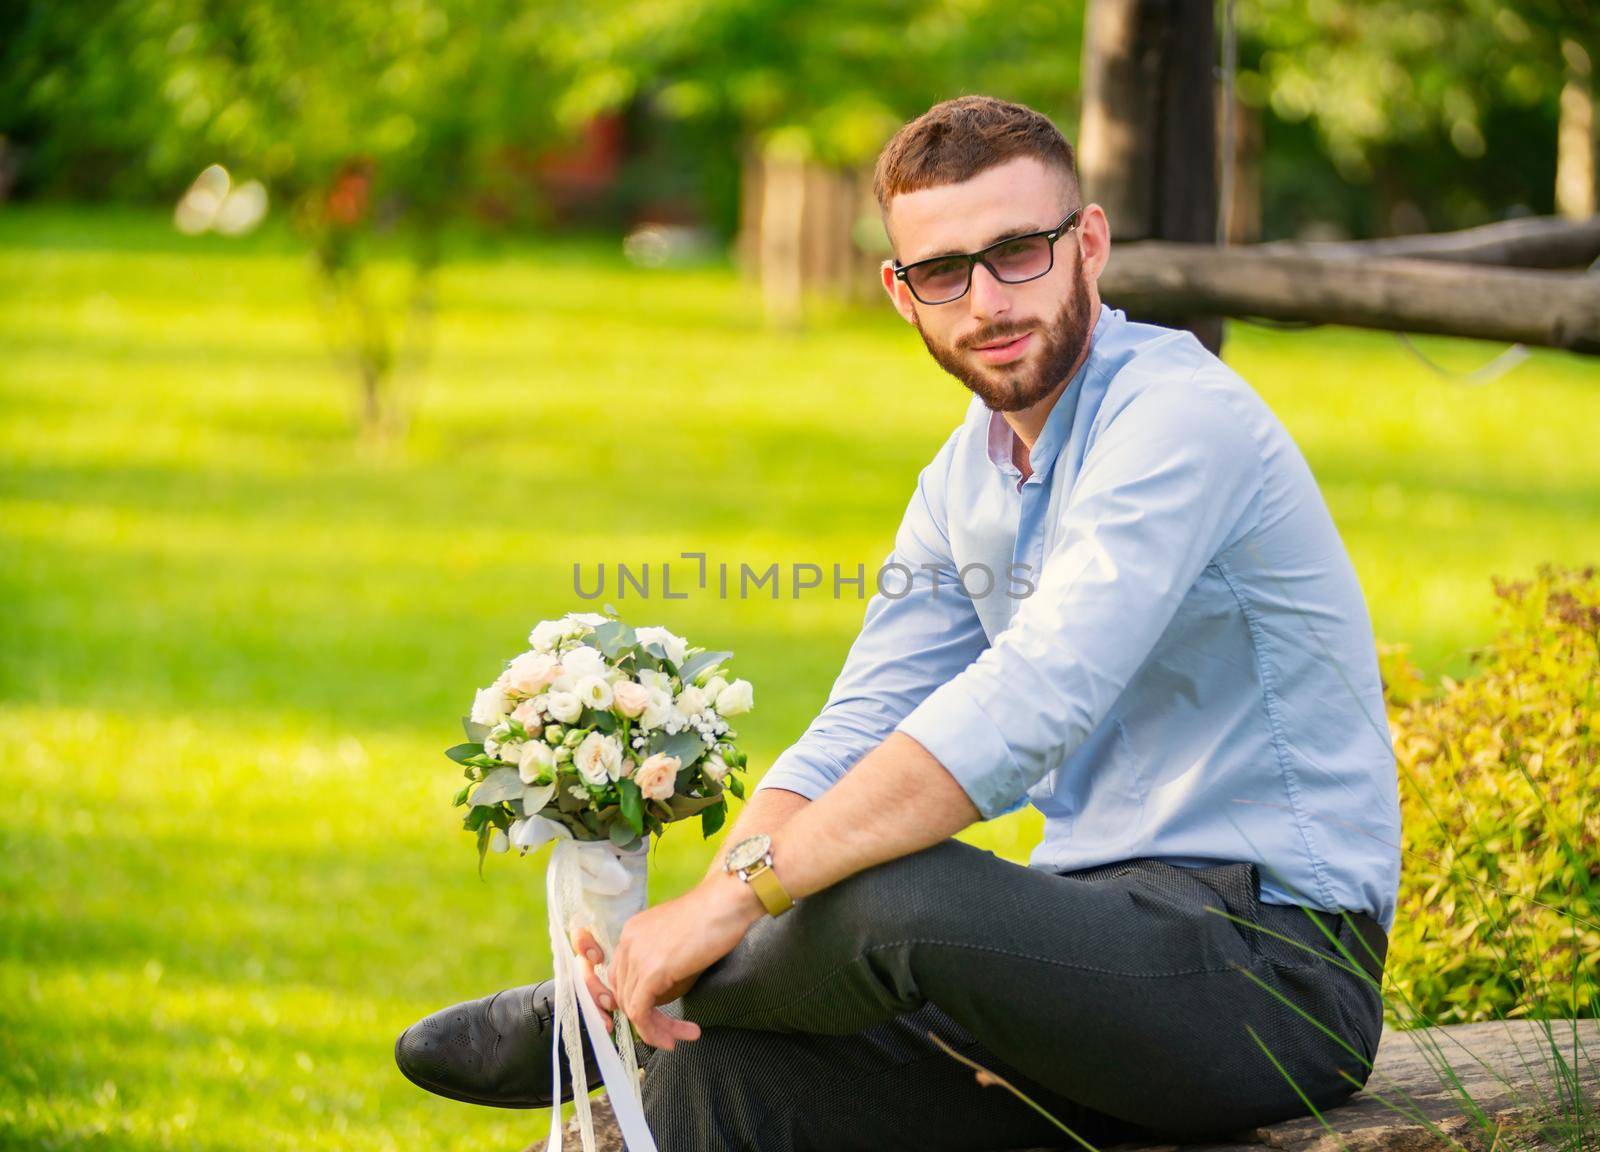 guy with a wedding bouquet in his hands